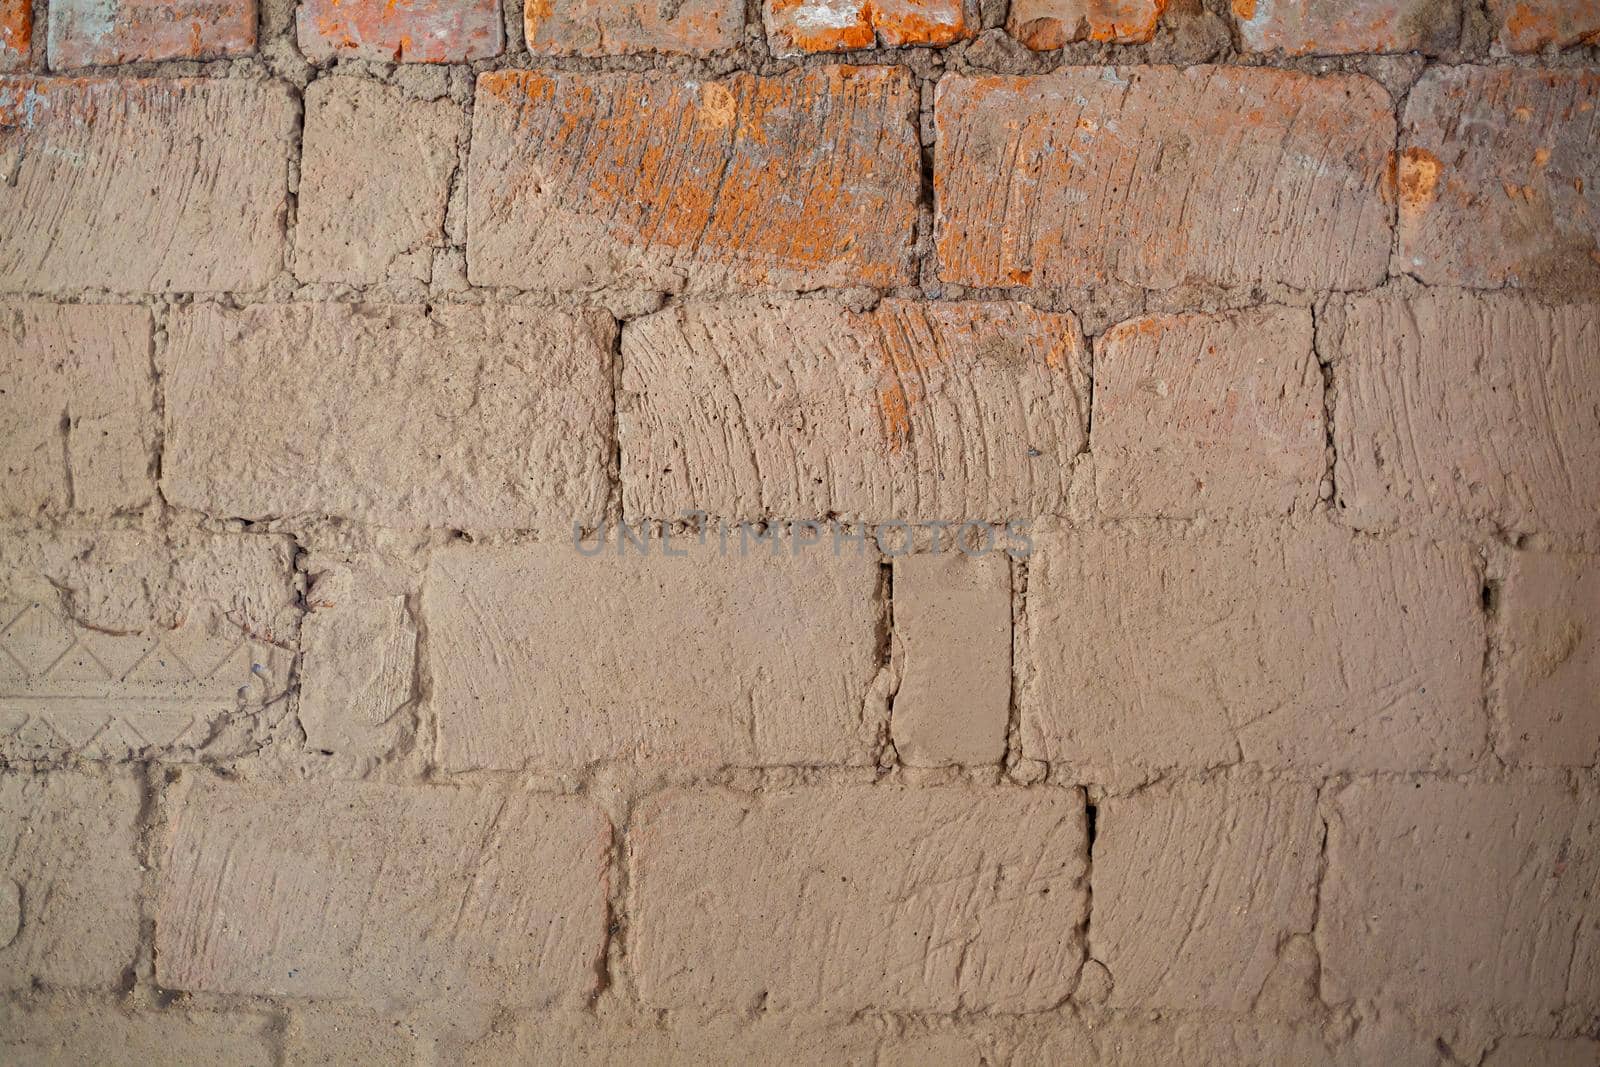 Repair of an old brick wall of a home stove. Different red bricks are laid in the wall after repair. Brick background